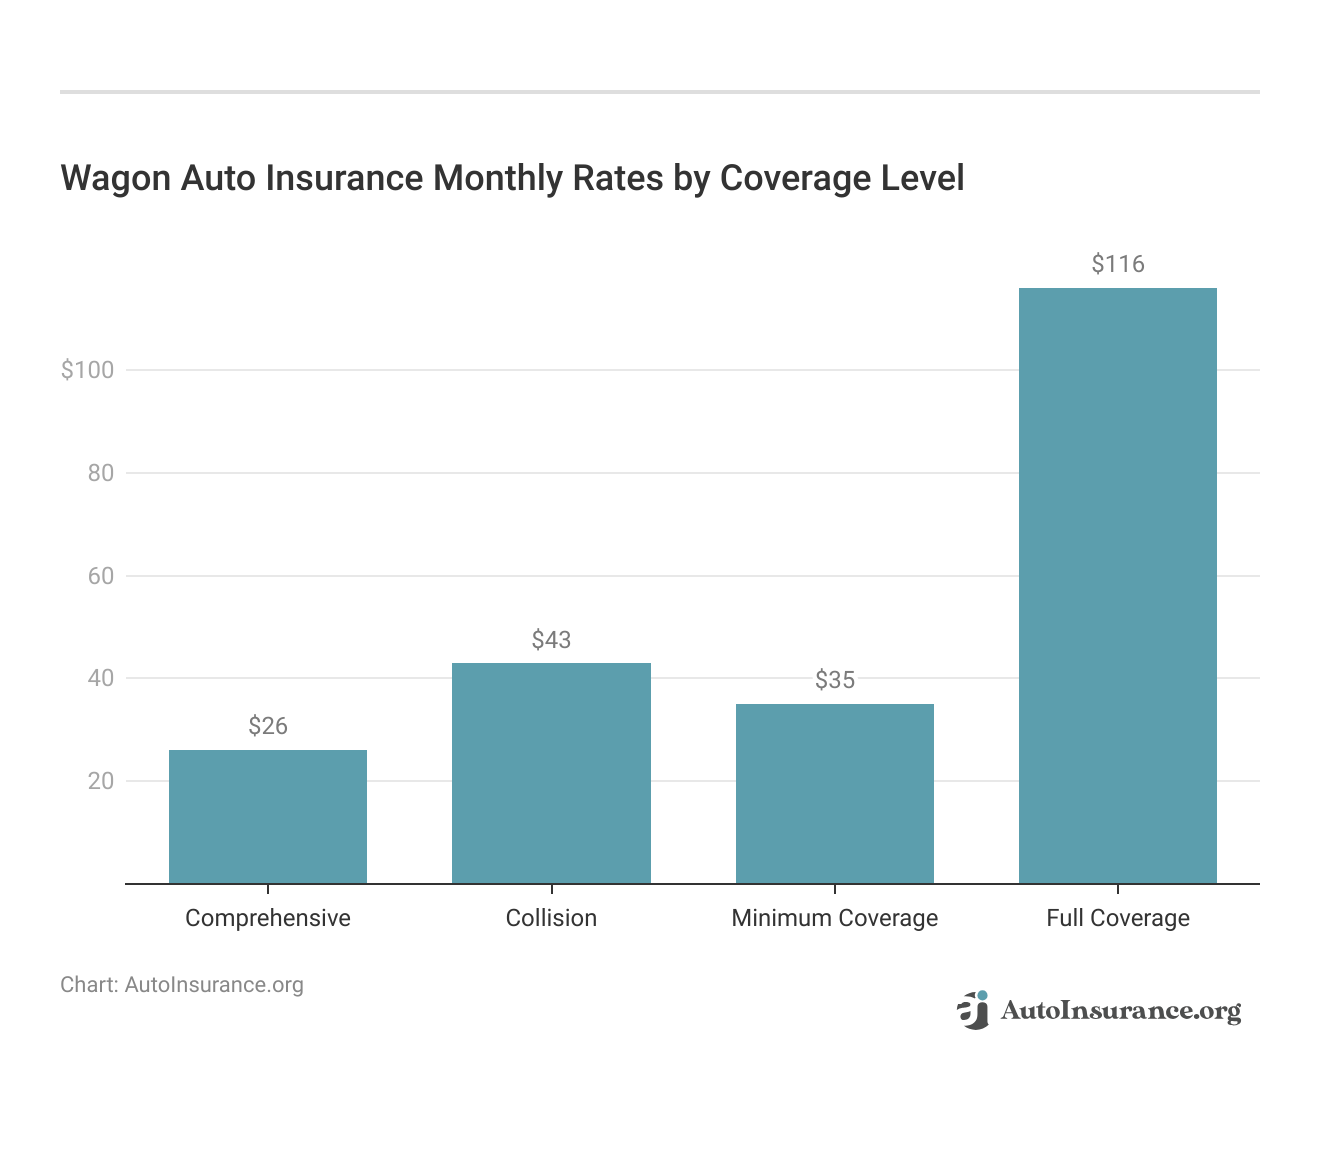 <h3>Wagon Auto Insurance Monthly Rates by Coverage Level</h3>